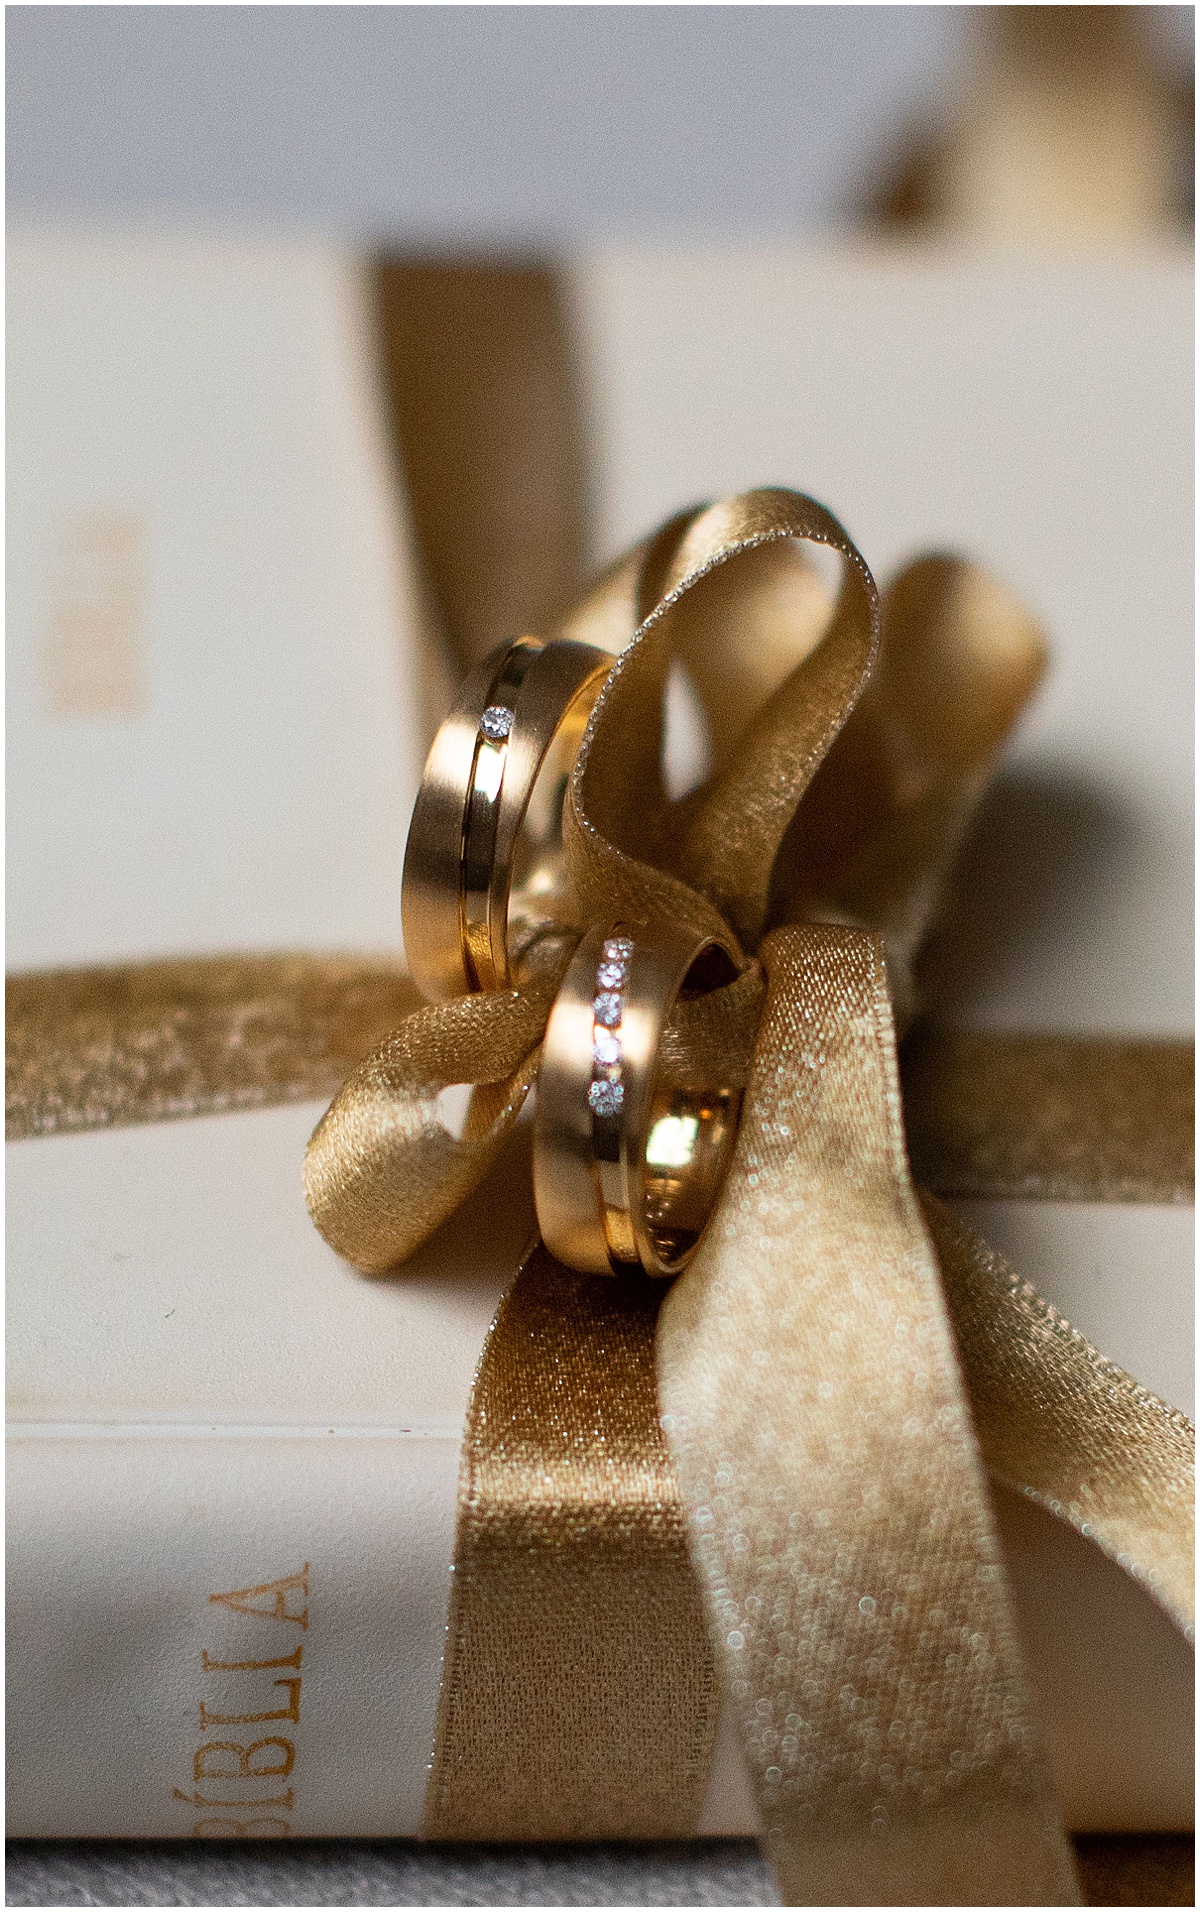 Golden wedding anniversary celebration with rings on a present